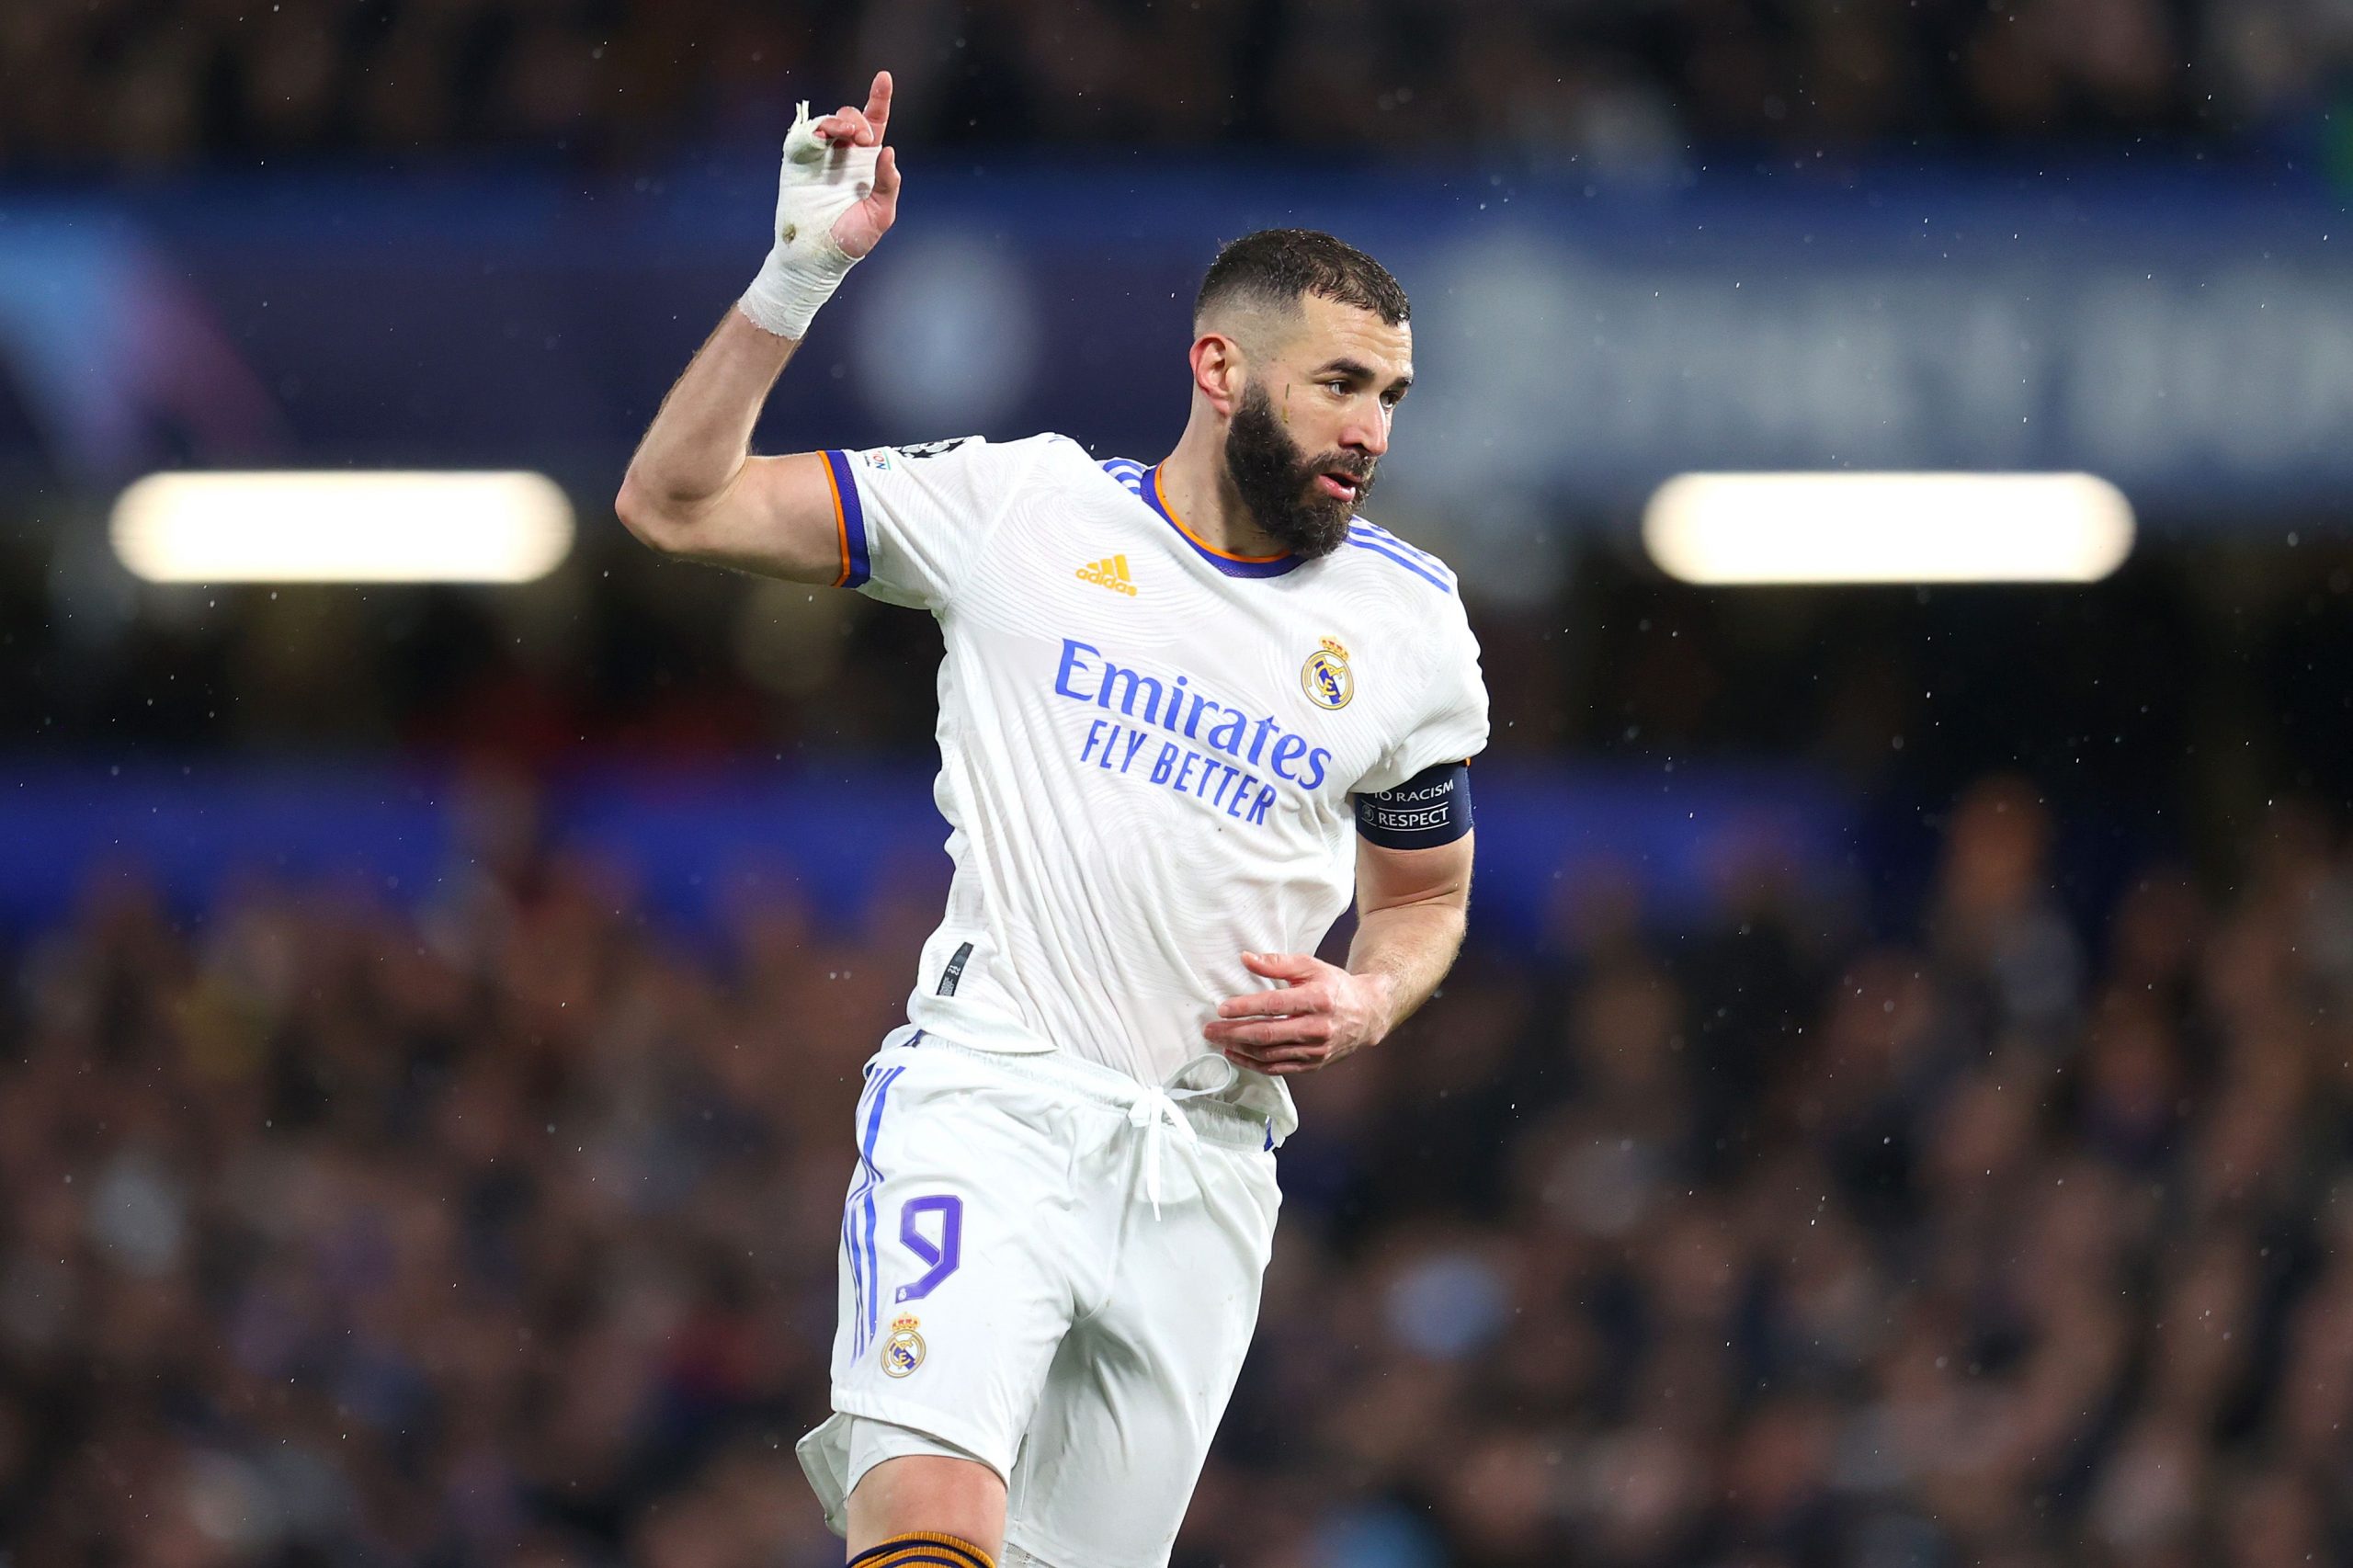 Men's Ballon d'Or 2022: French Forward Benzema the Clear Favorite